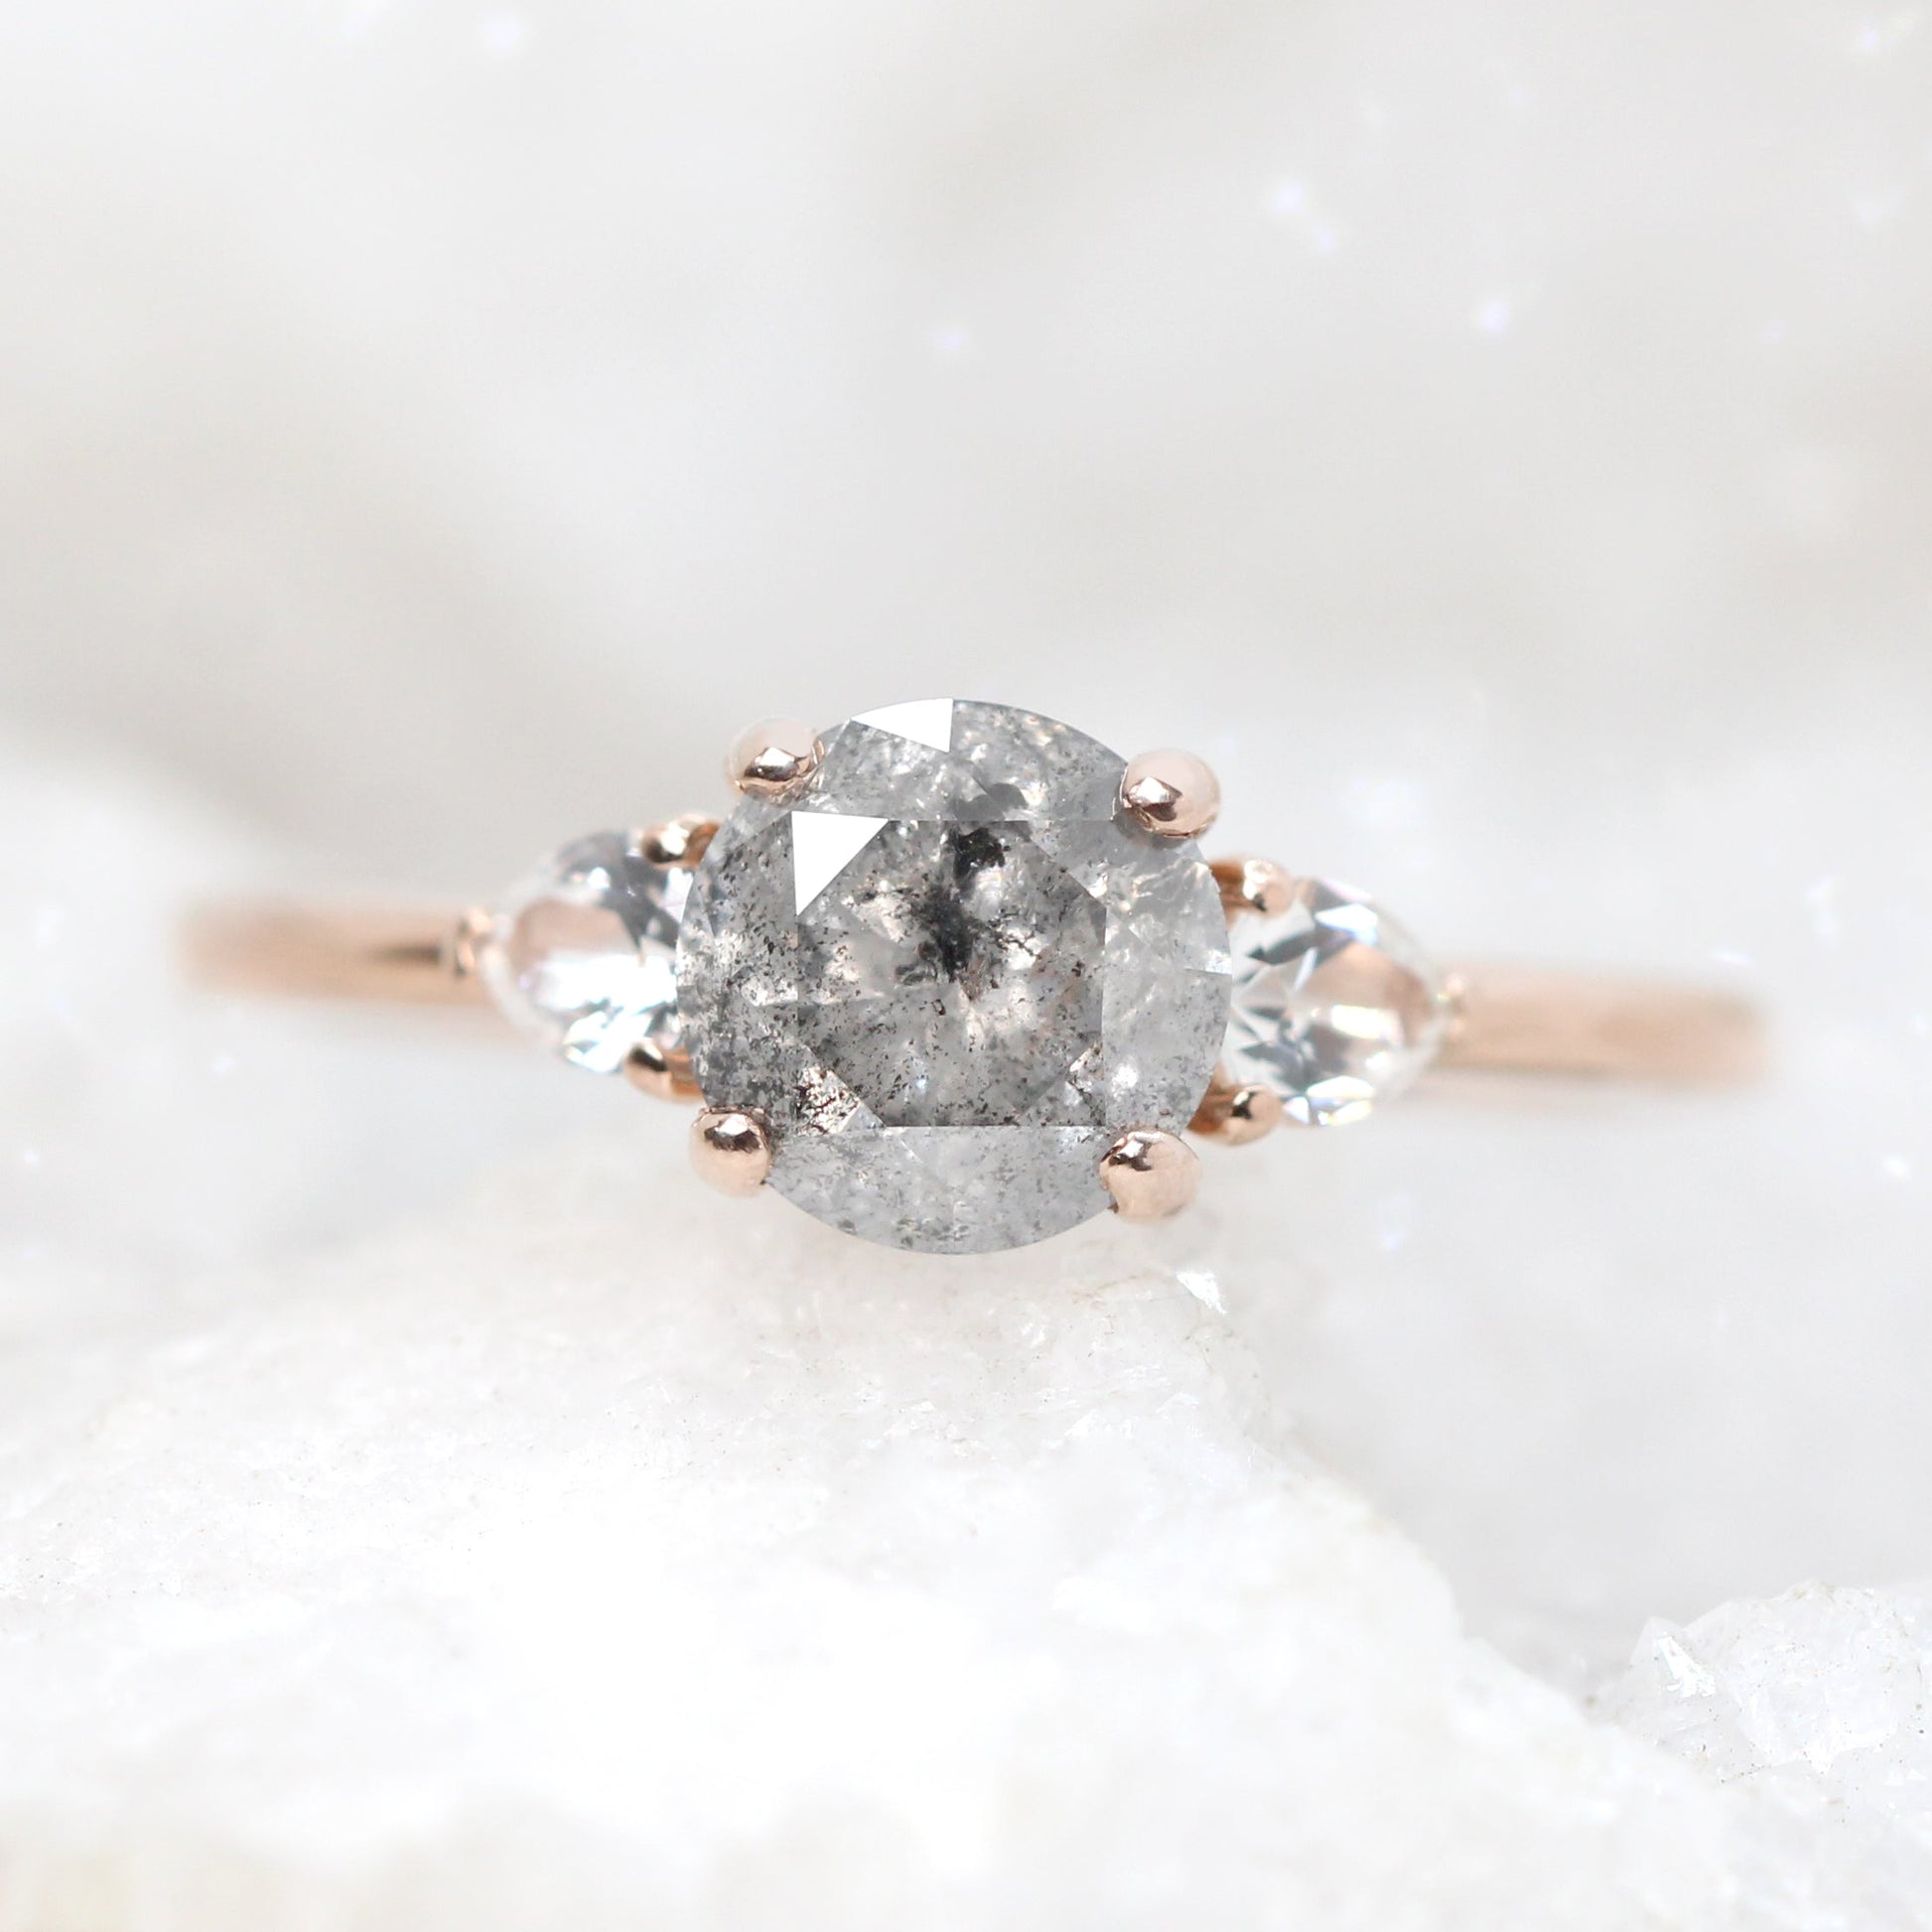 Faye Ring with a 1.28 Round Gray Celestial Diamond and White Sapphire Accents in 14k Rose Gold - Ready to Size and Ship - Midwinter Co. Alternative Bridal Rings and Modern Fine Jewelry